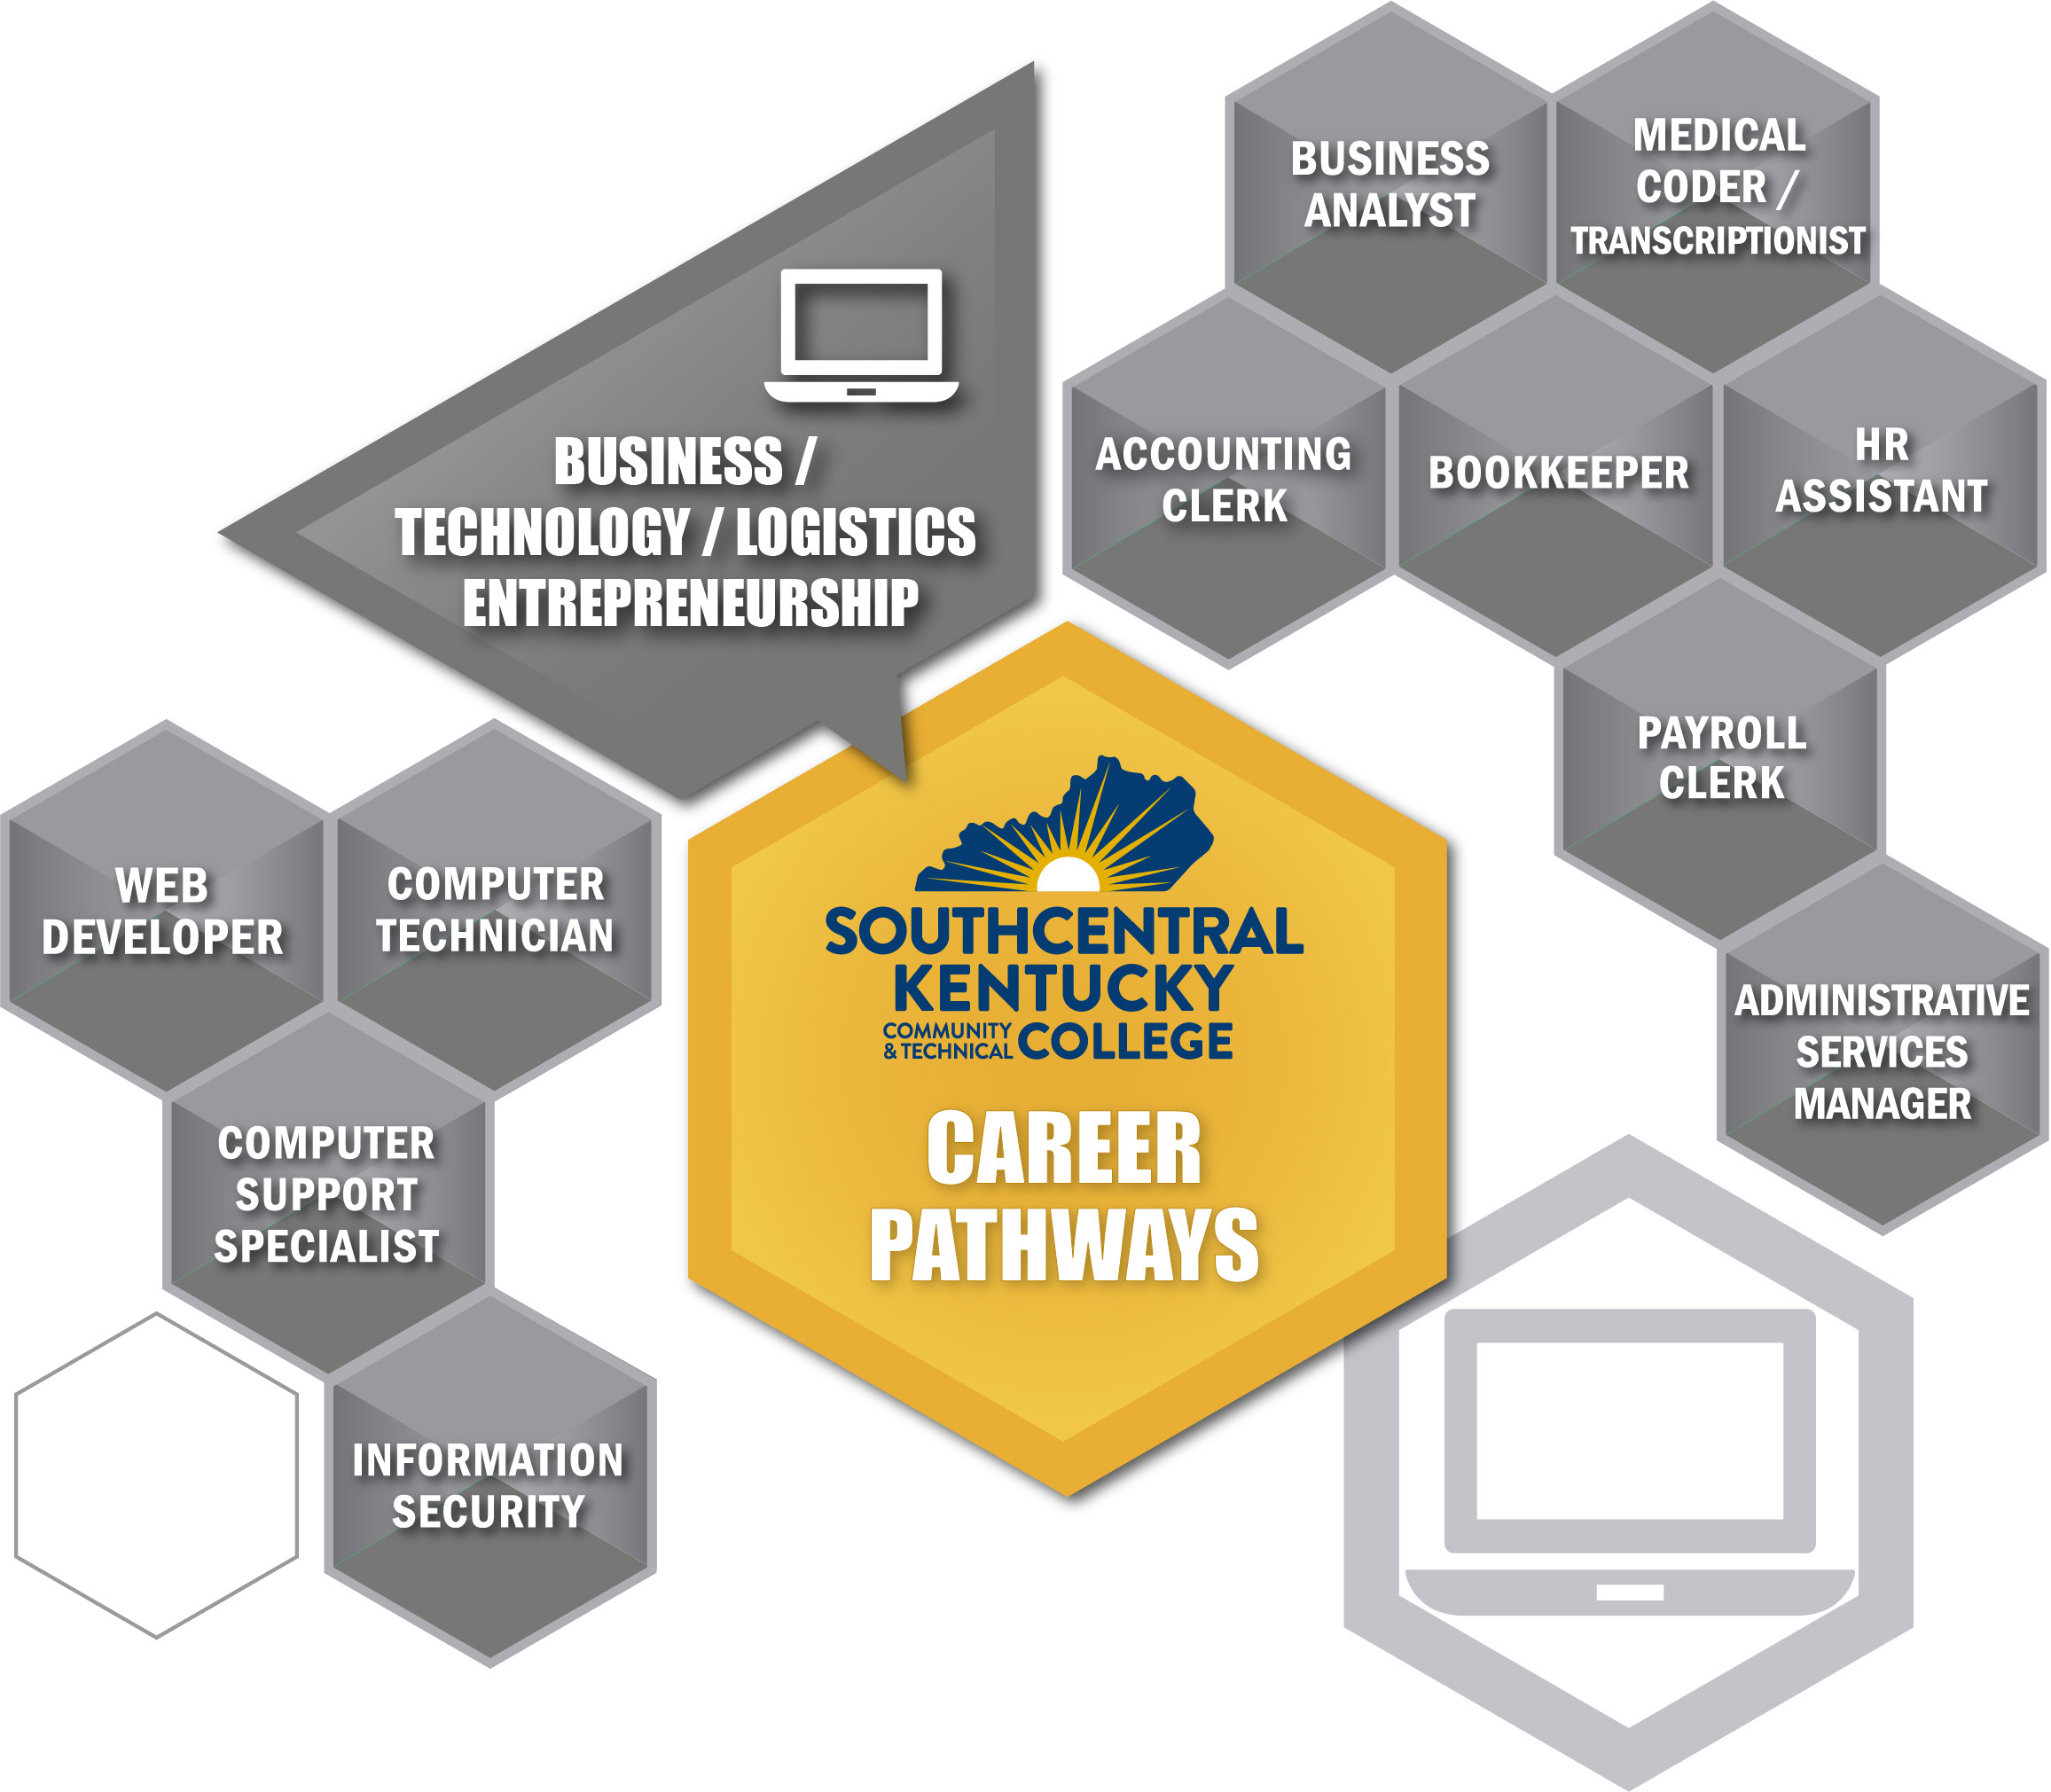 Conventional career sector with related careers. Same careers listed below the image.